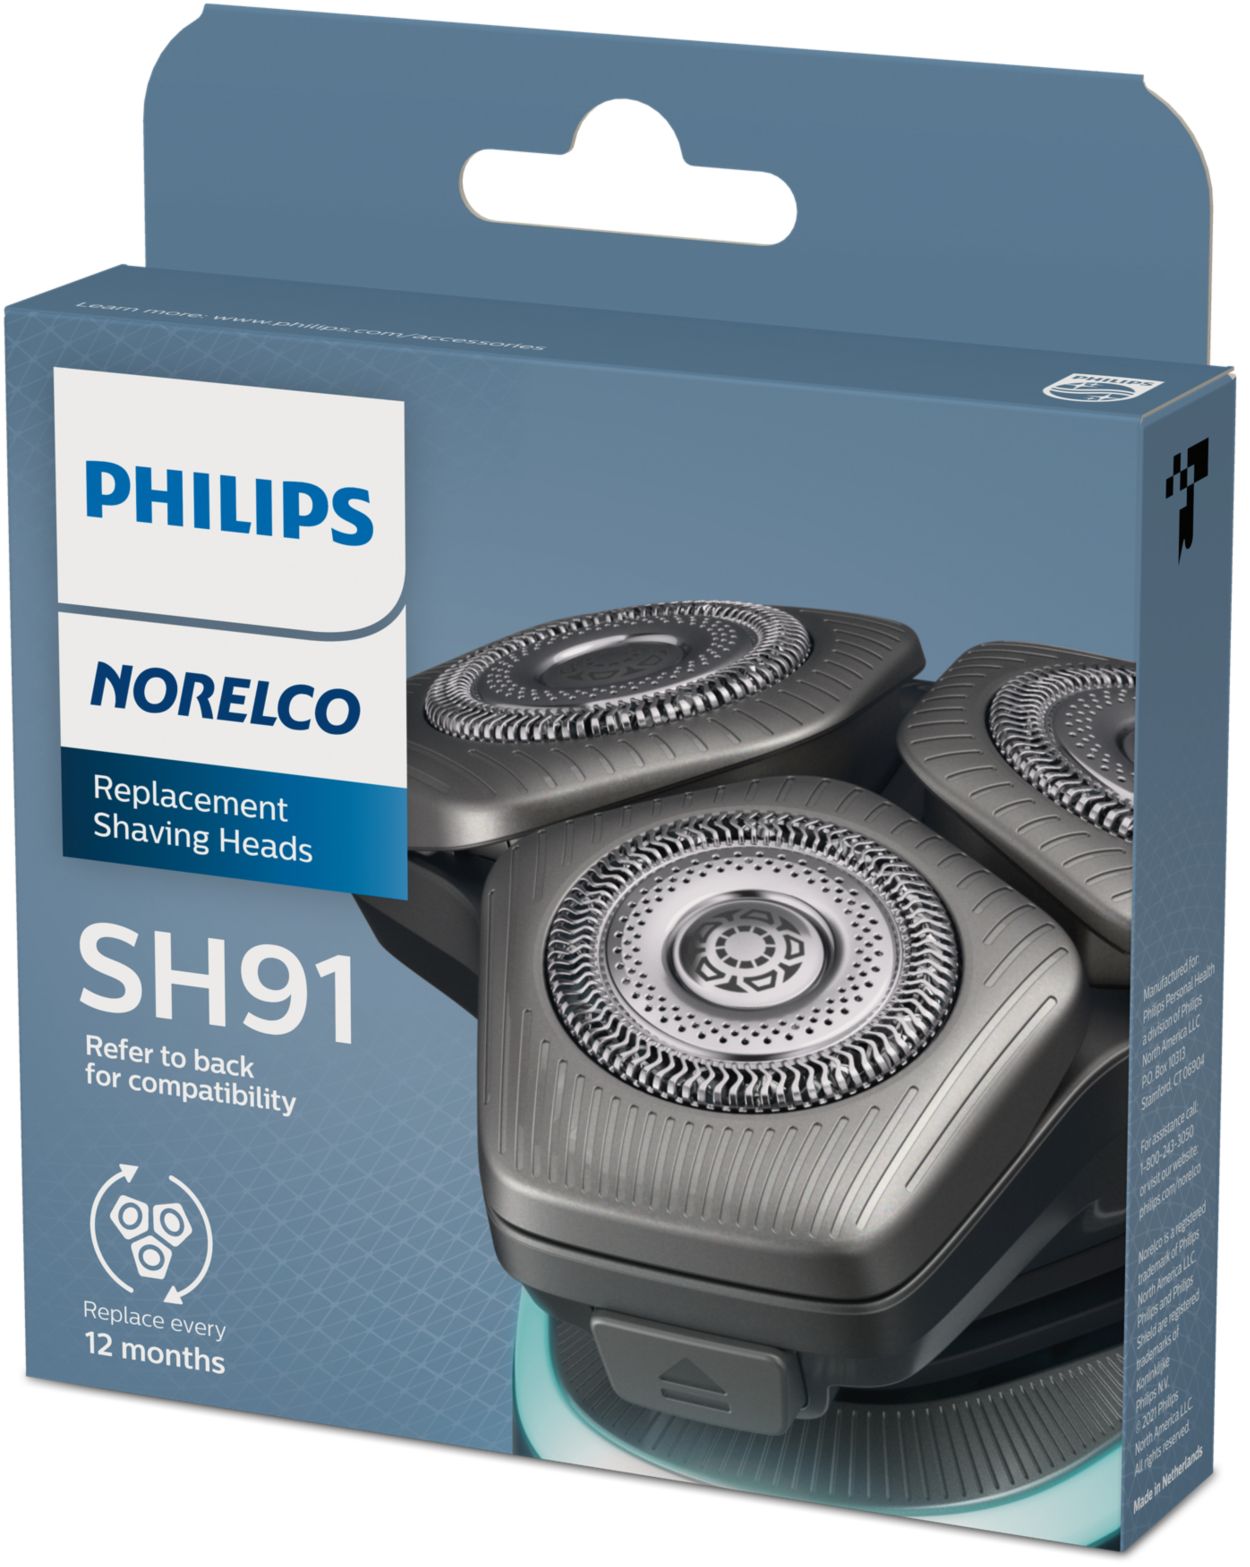 SH91 shaving SH91/52 Replacement Norelco | heads Refill Blade